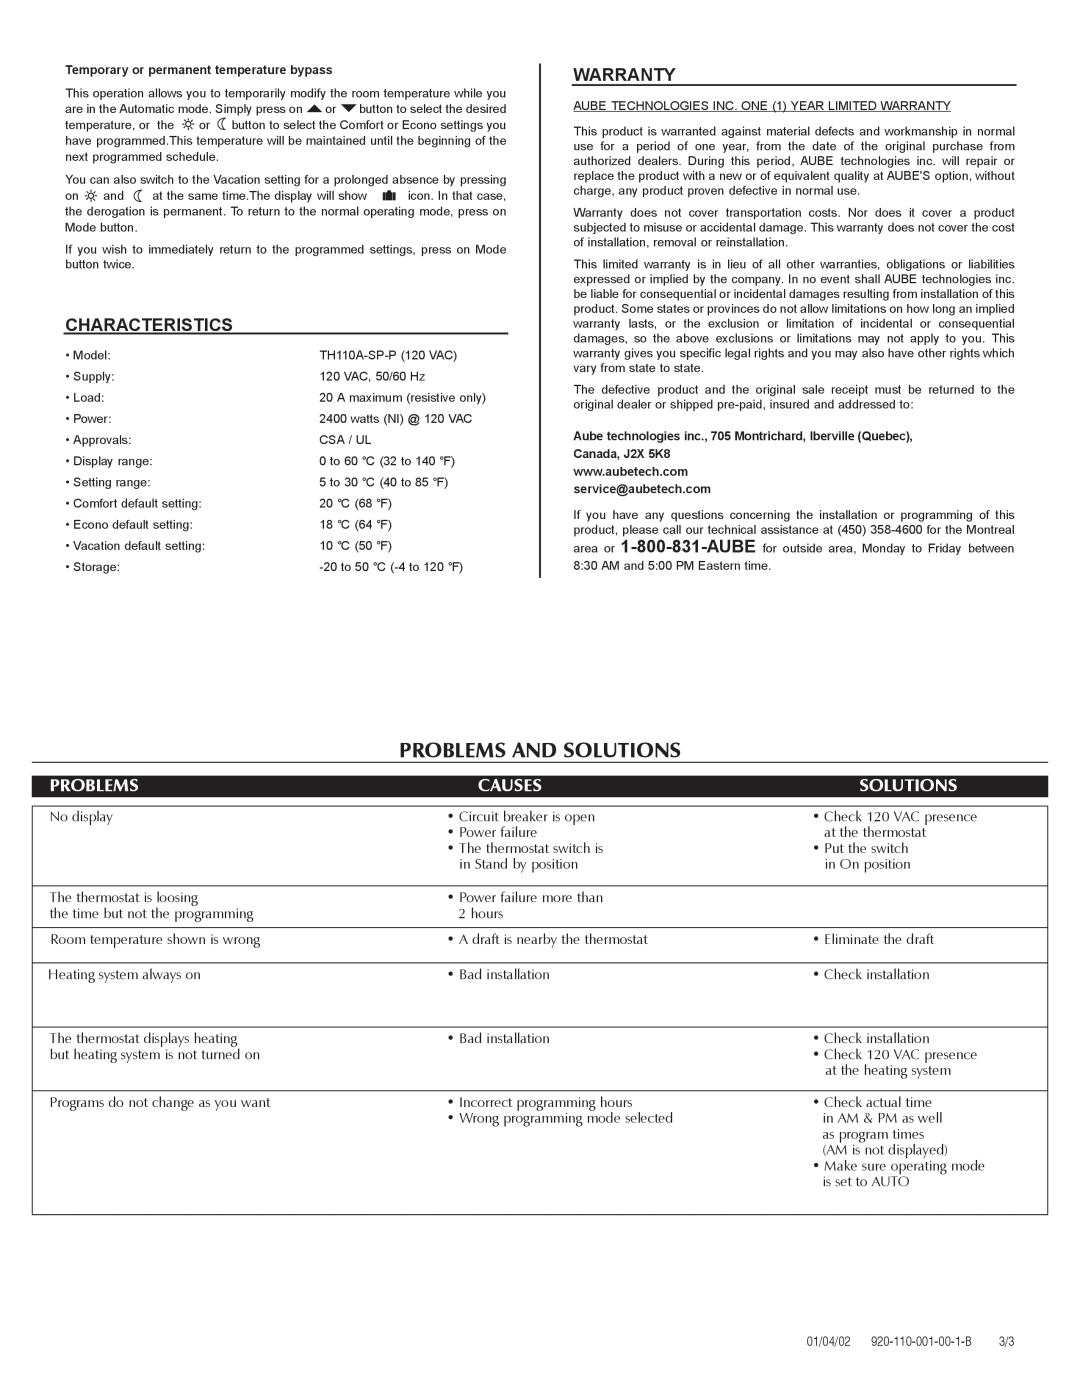 Aube Technologies TH110A-SP-P manual Characteristics, Warranty, Problems And Solutions, Causes 